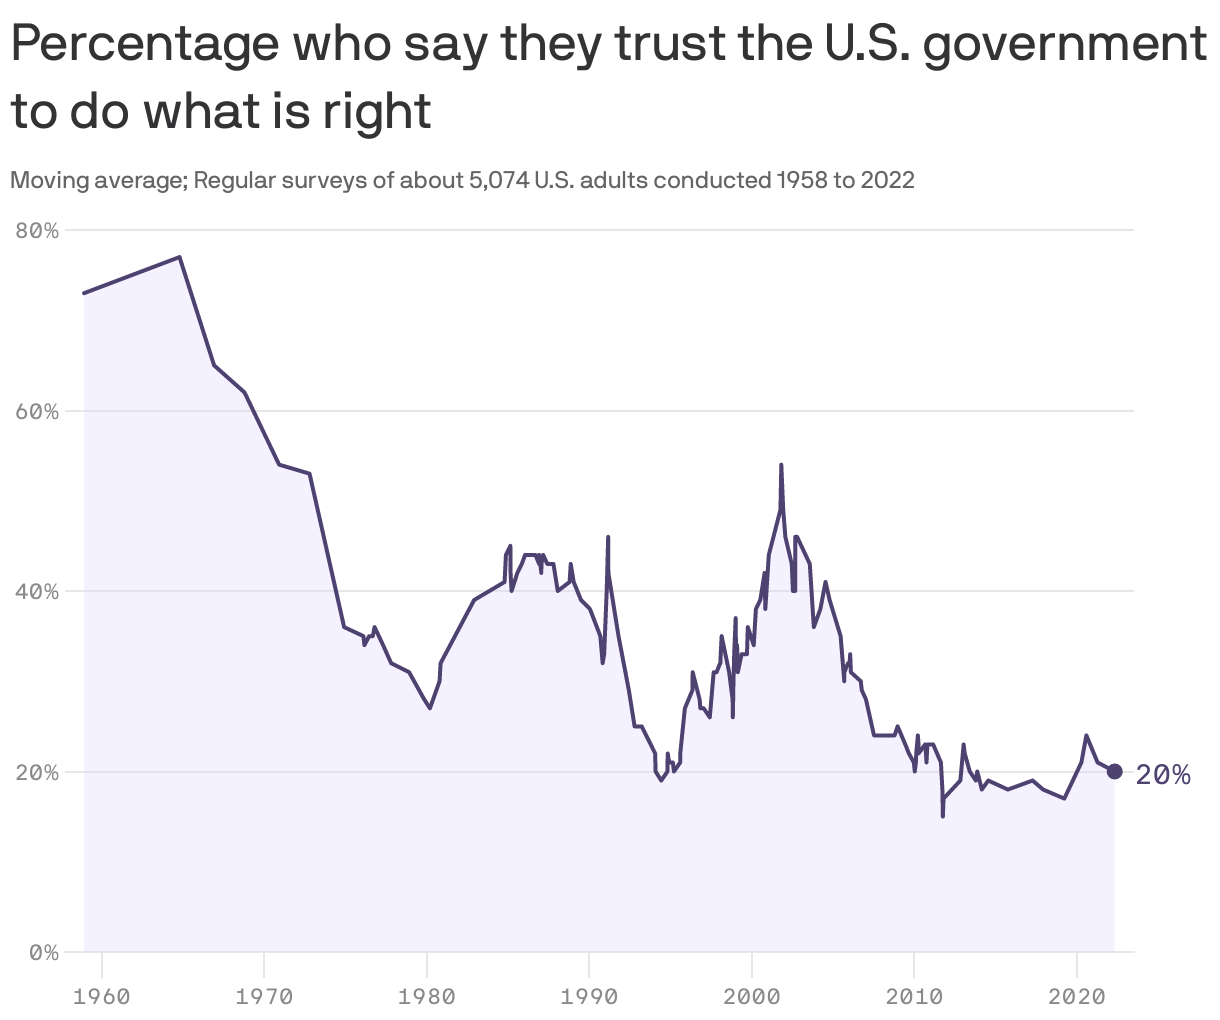 Percentage who say they trust the U.S. government to do what is right